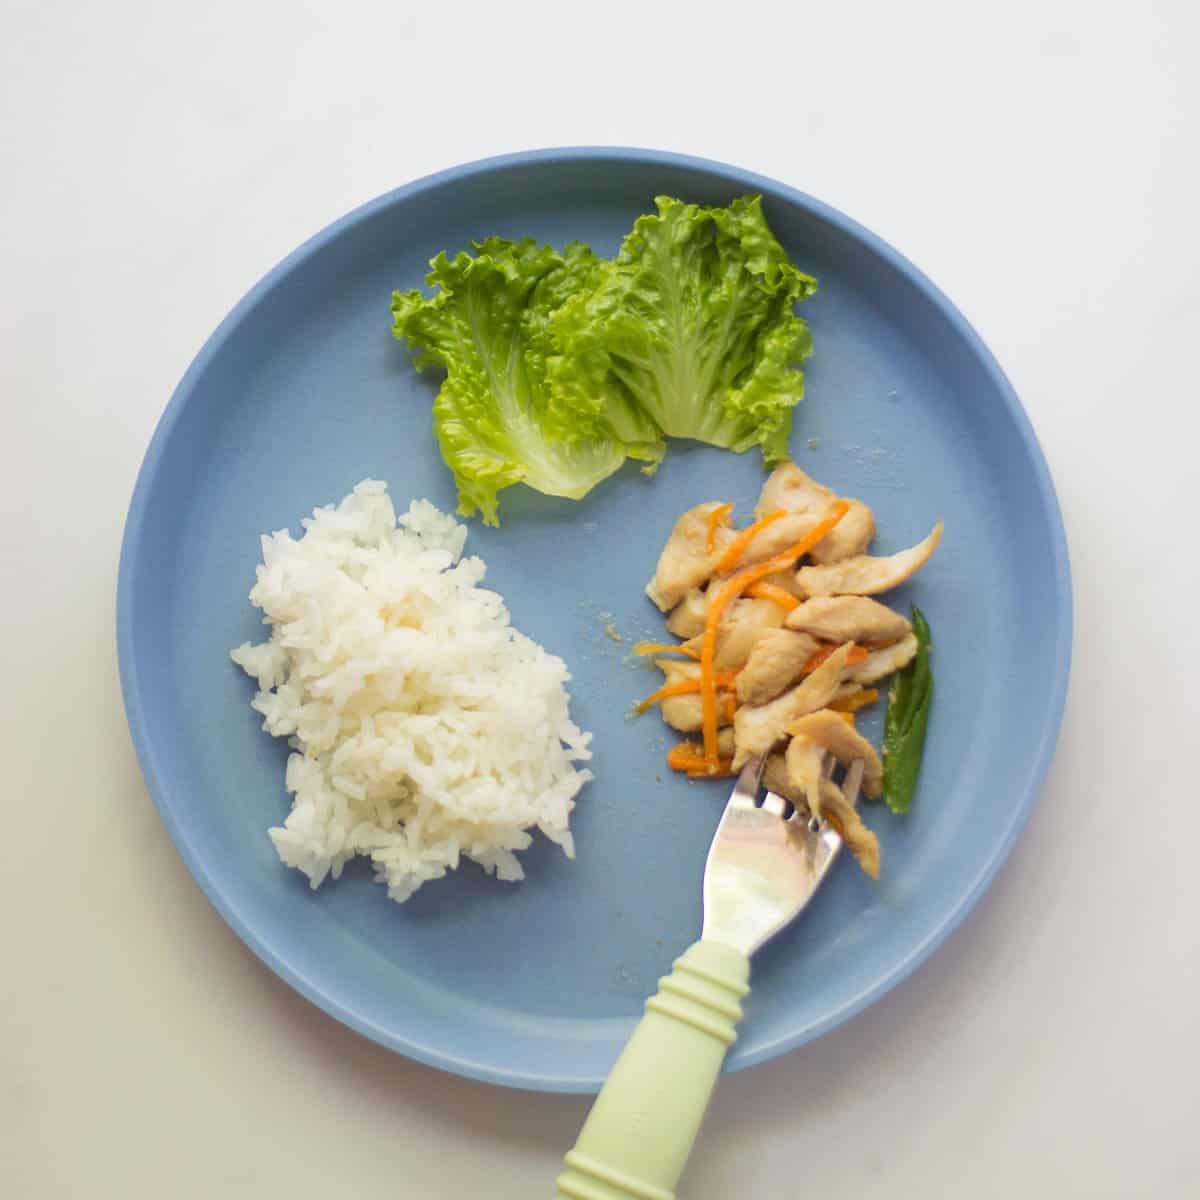 A small portion of bulgogi, white rice, and lettuce for toddler.